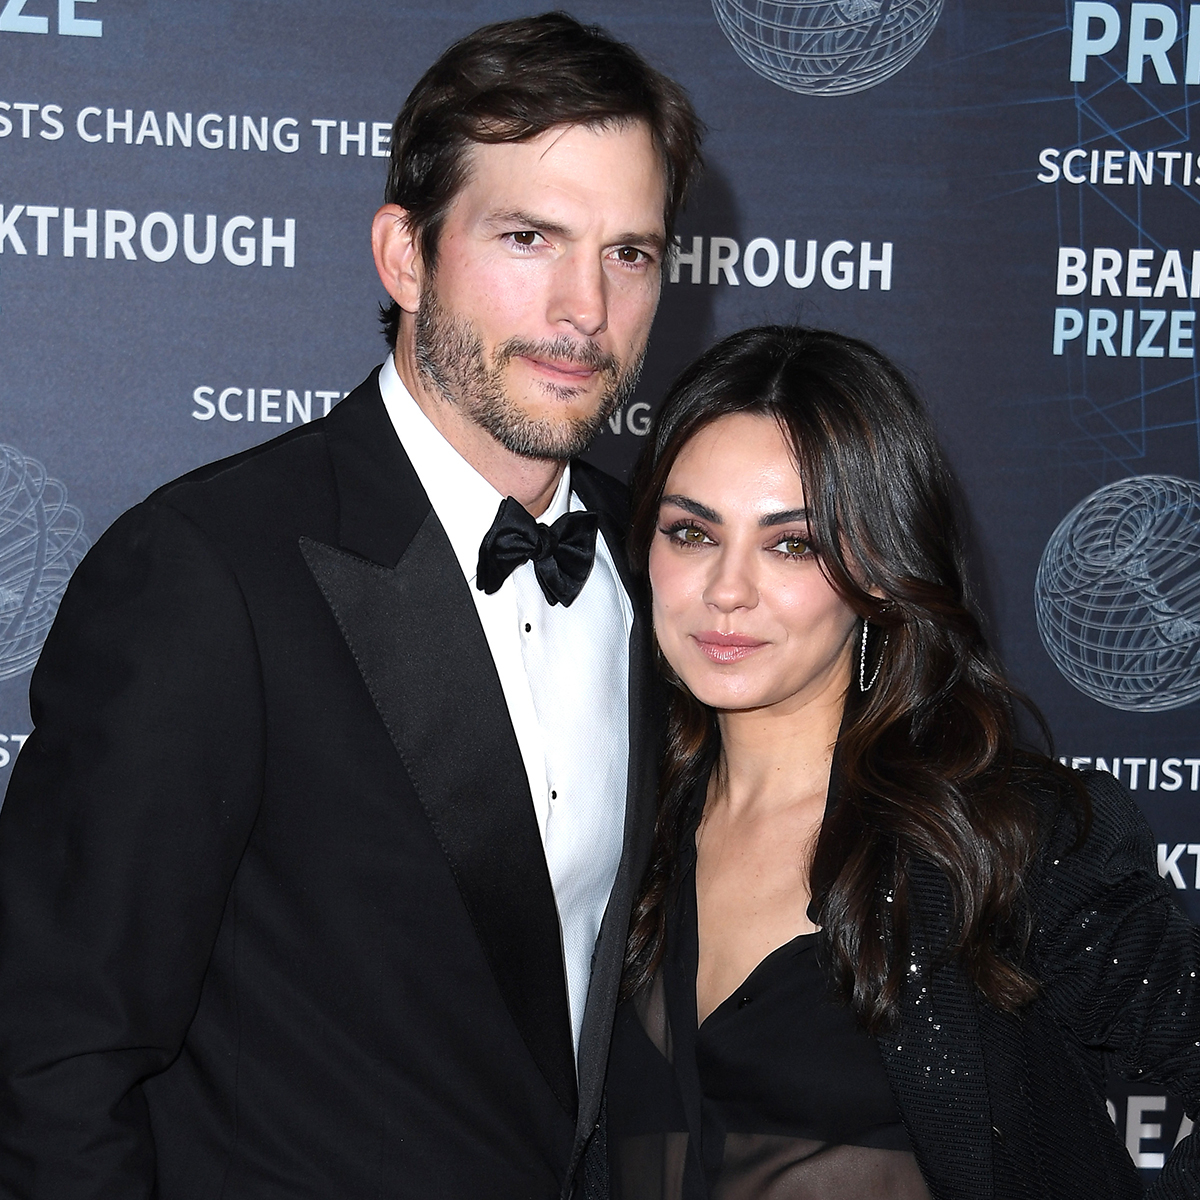 Here’s How You Can Stay at Ashton Kutcher and Mila Kunis’ Beach House